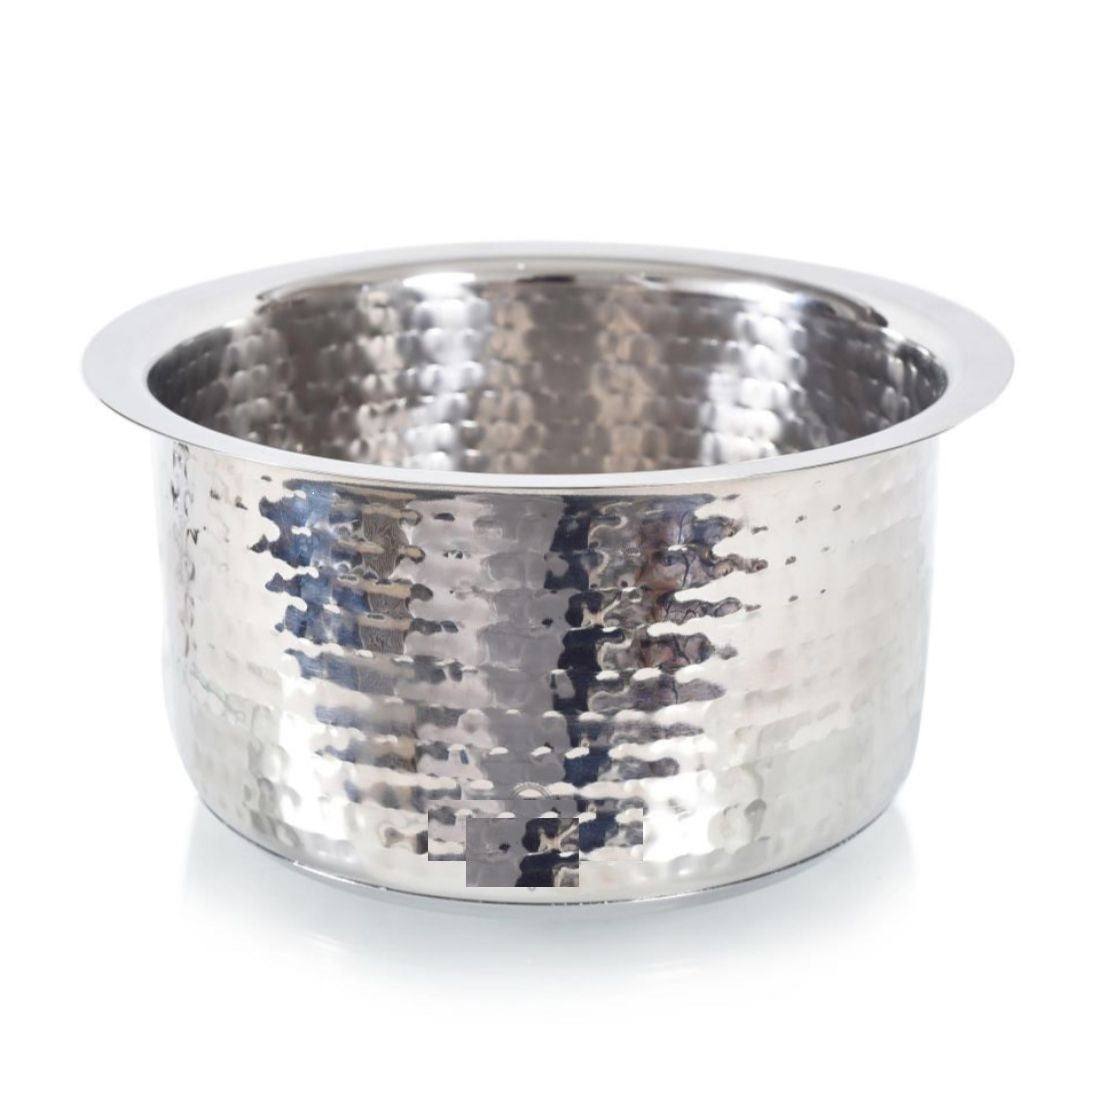 Aluminium Indian Hammered Deep Pot 15.9L with Lid No25 Round Heavy Duty 6226